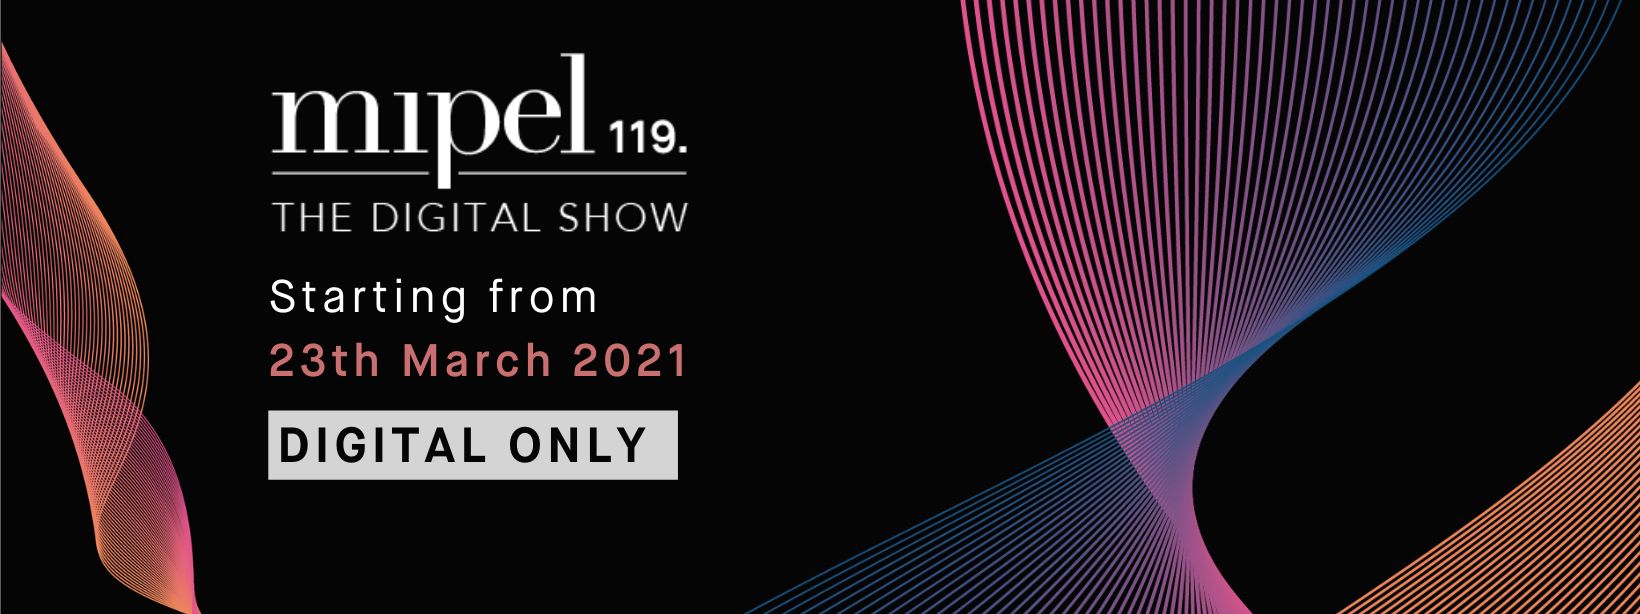 MIPEL119 GOES DIGITAL starting from 23rd March 2021:WE'RE WAITING FOR YOU!